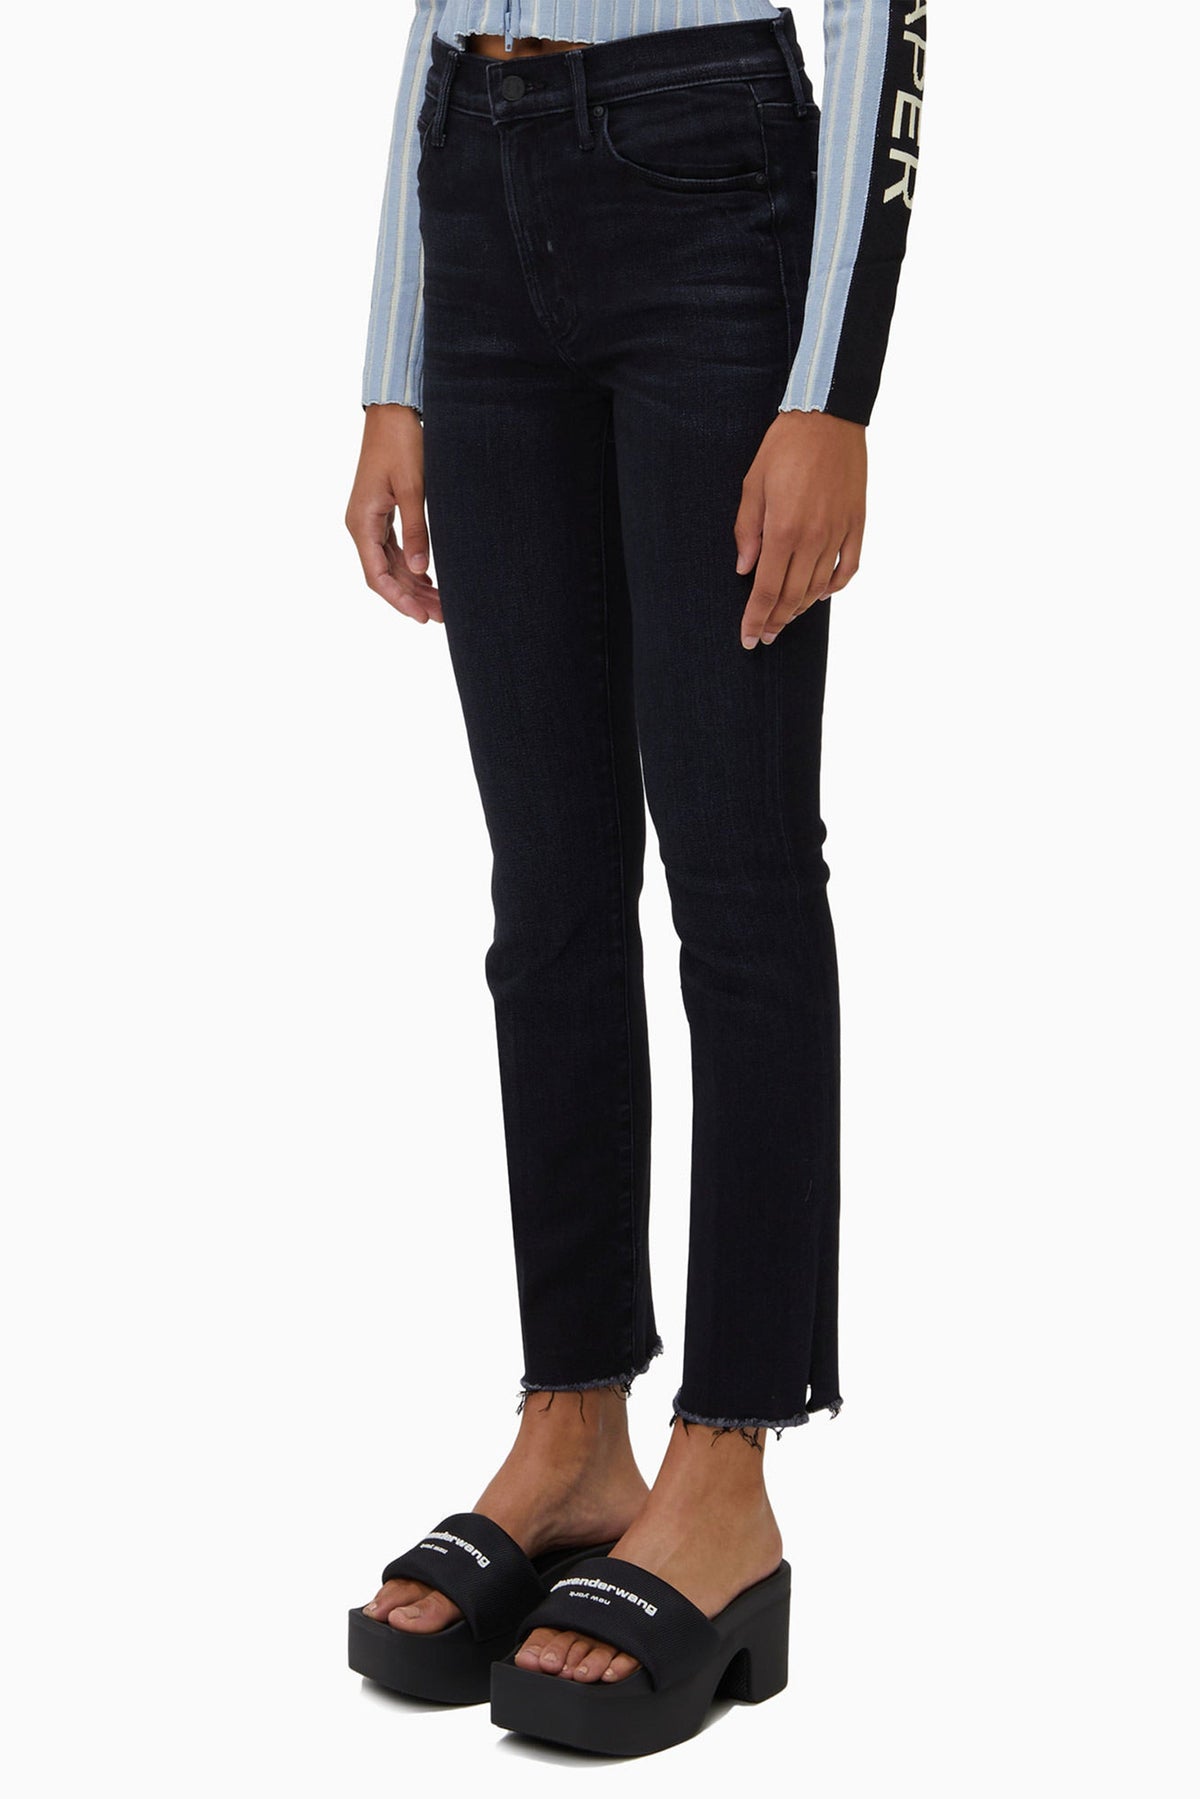 MOTHER PANTALONE IN DENIM  Jeans Mother Nero The Rascal Ankle Snippet